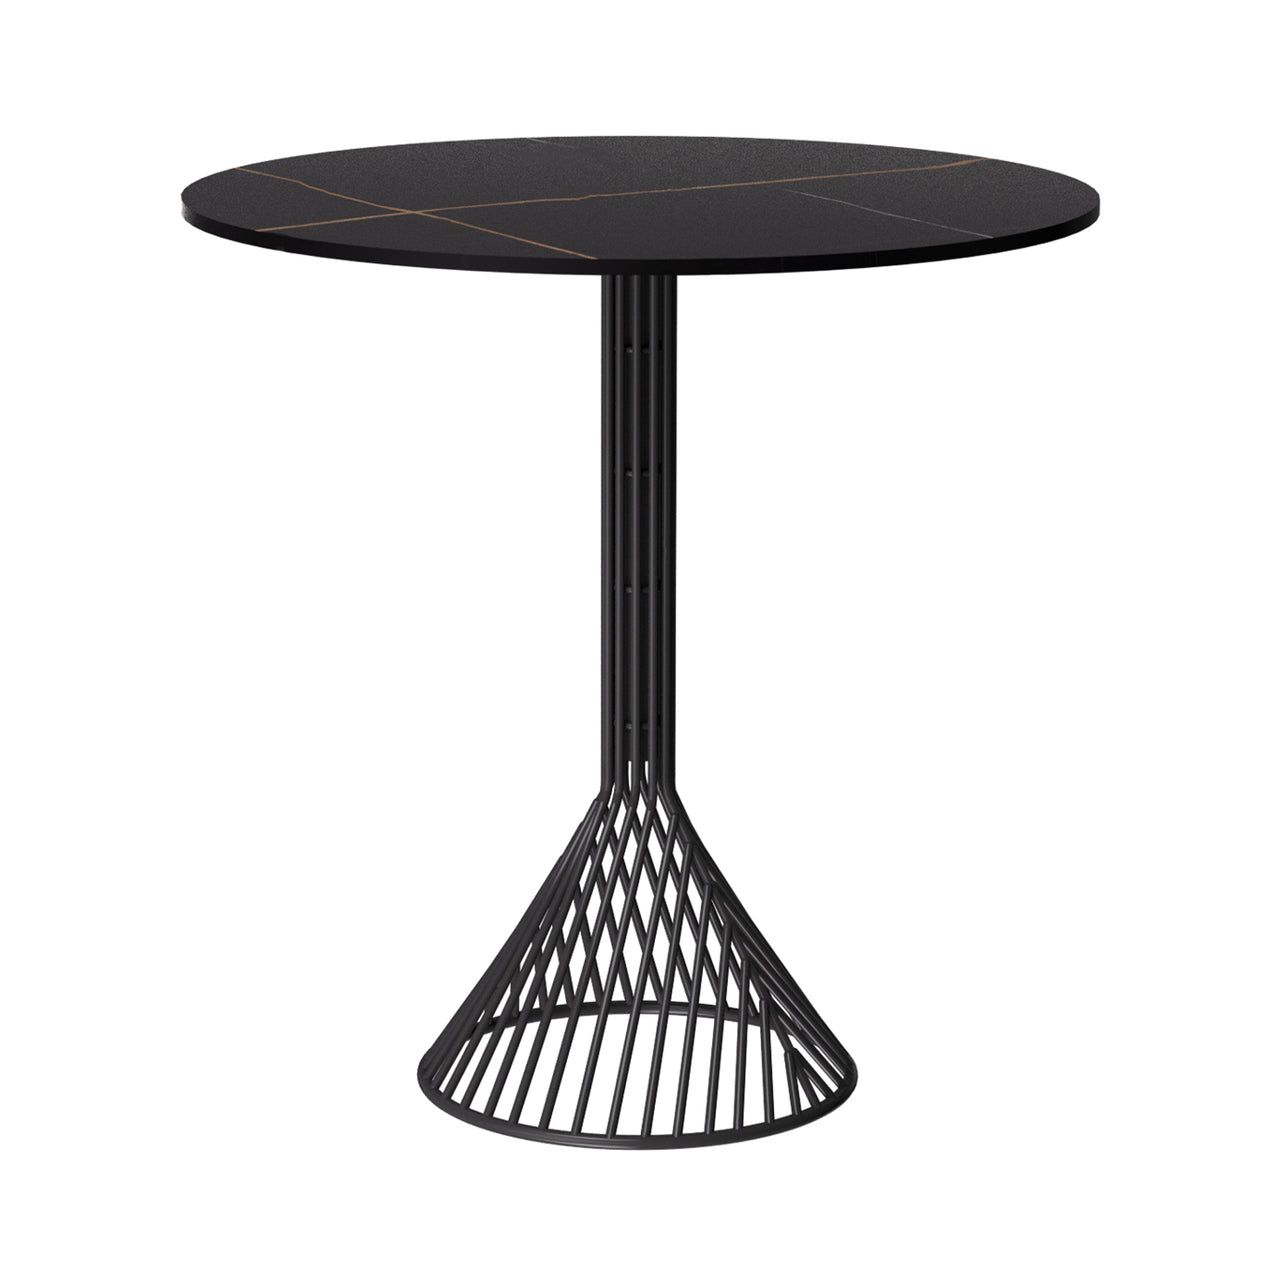 Bistro Cafe Table with Stone Top: Black